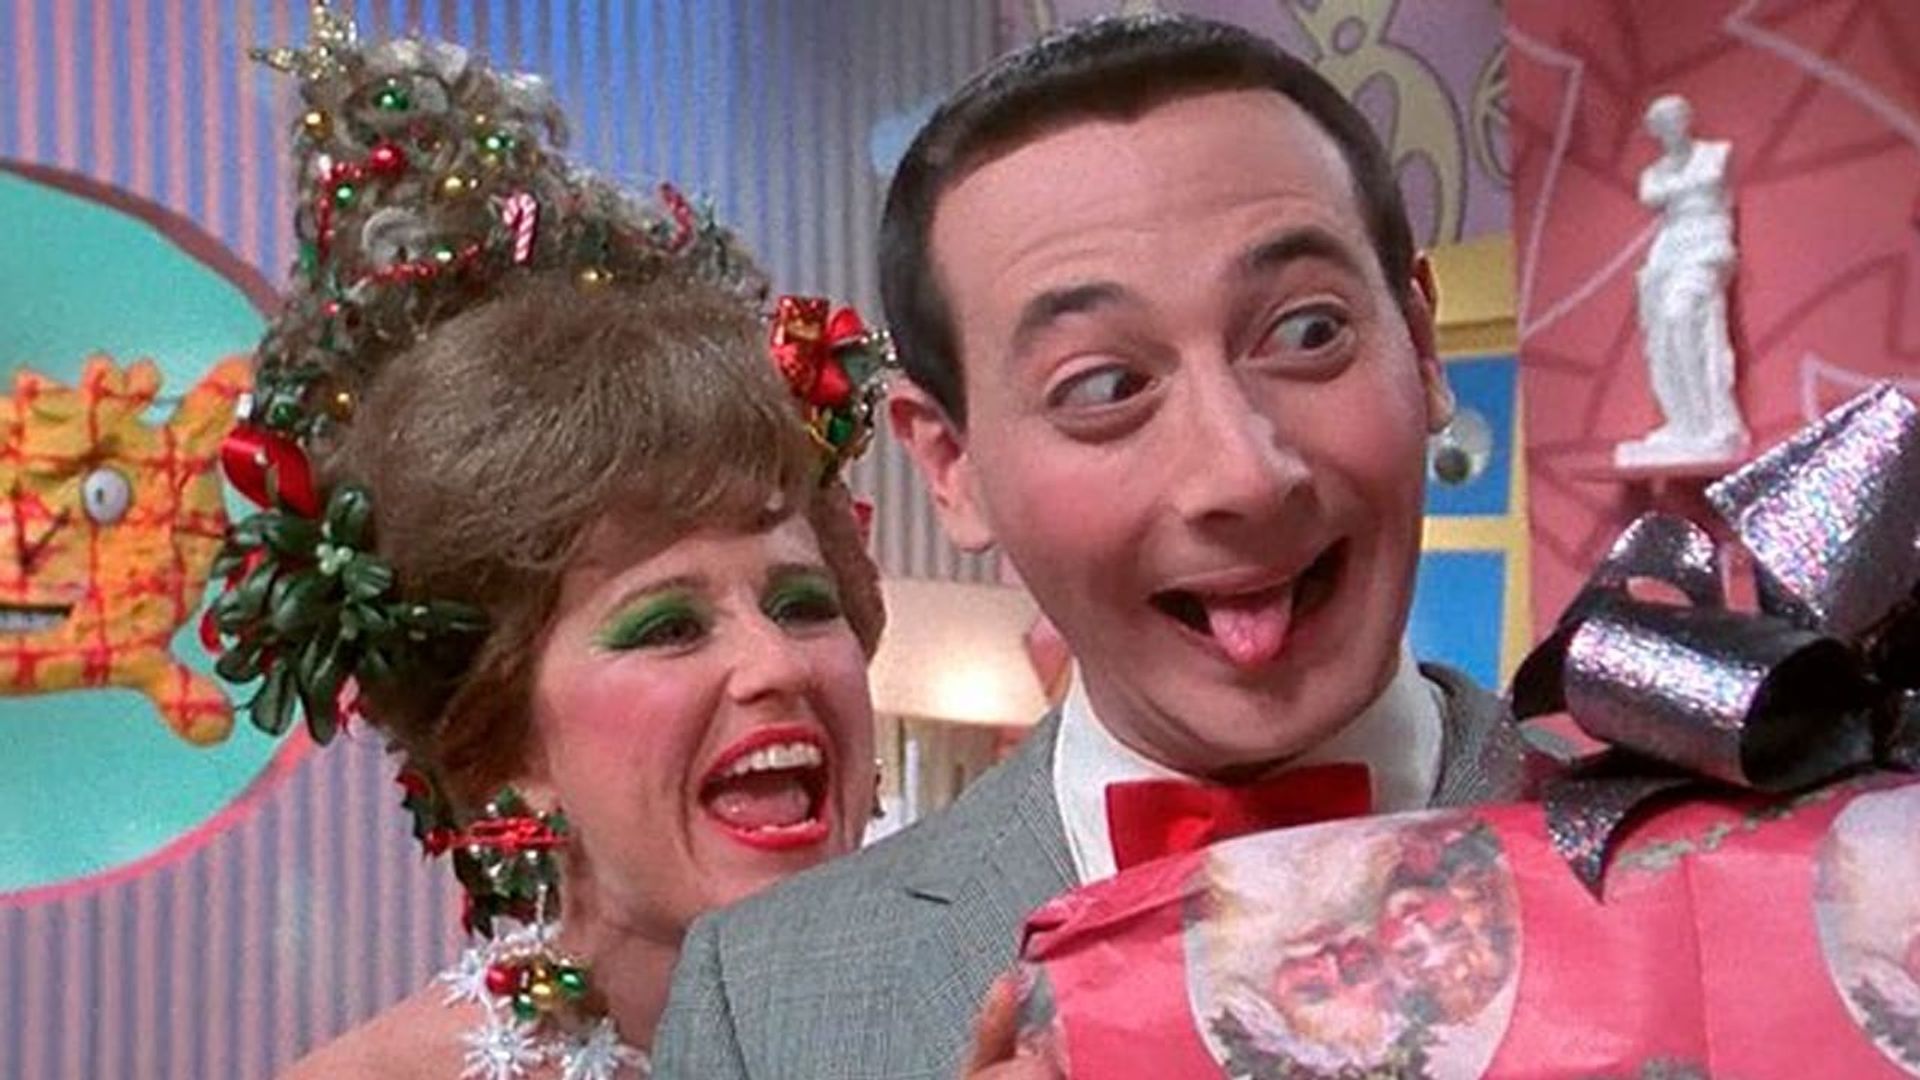 Pee-wee's Playhouse Christmas Special Backdrop